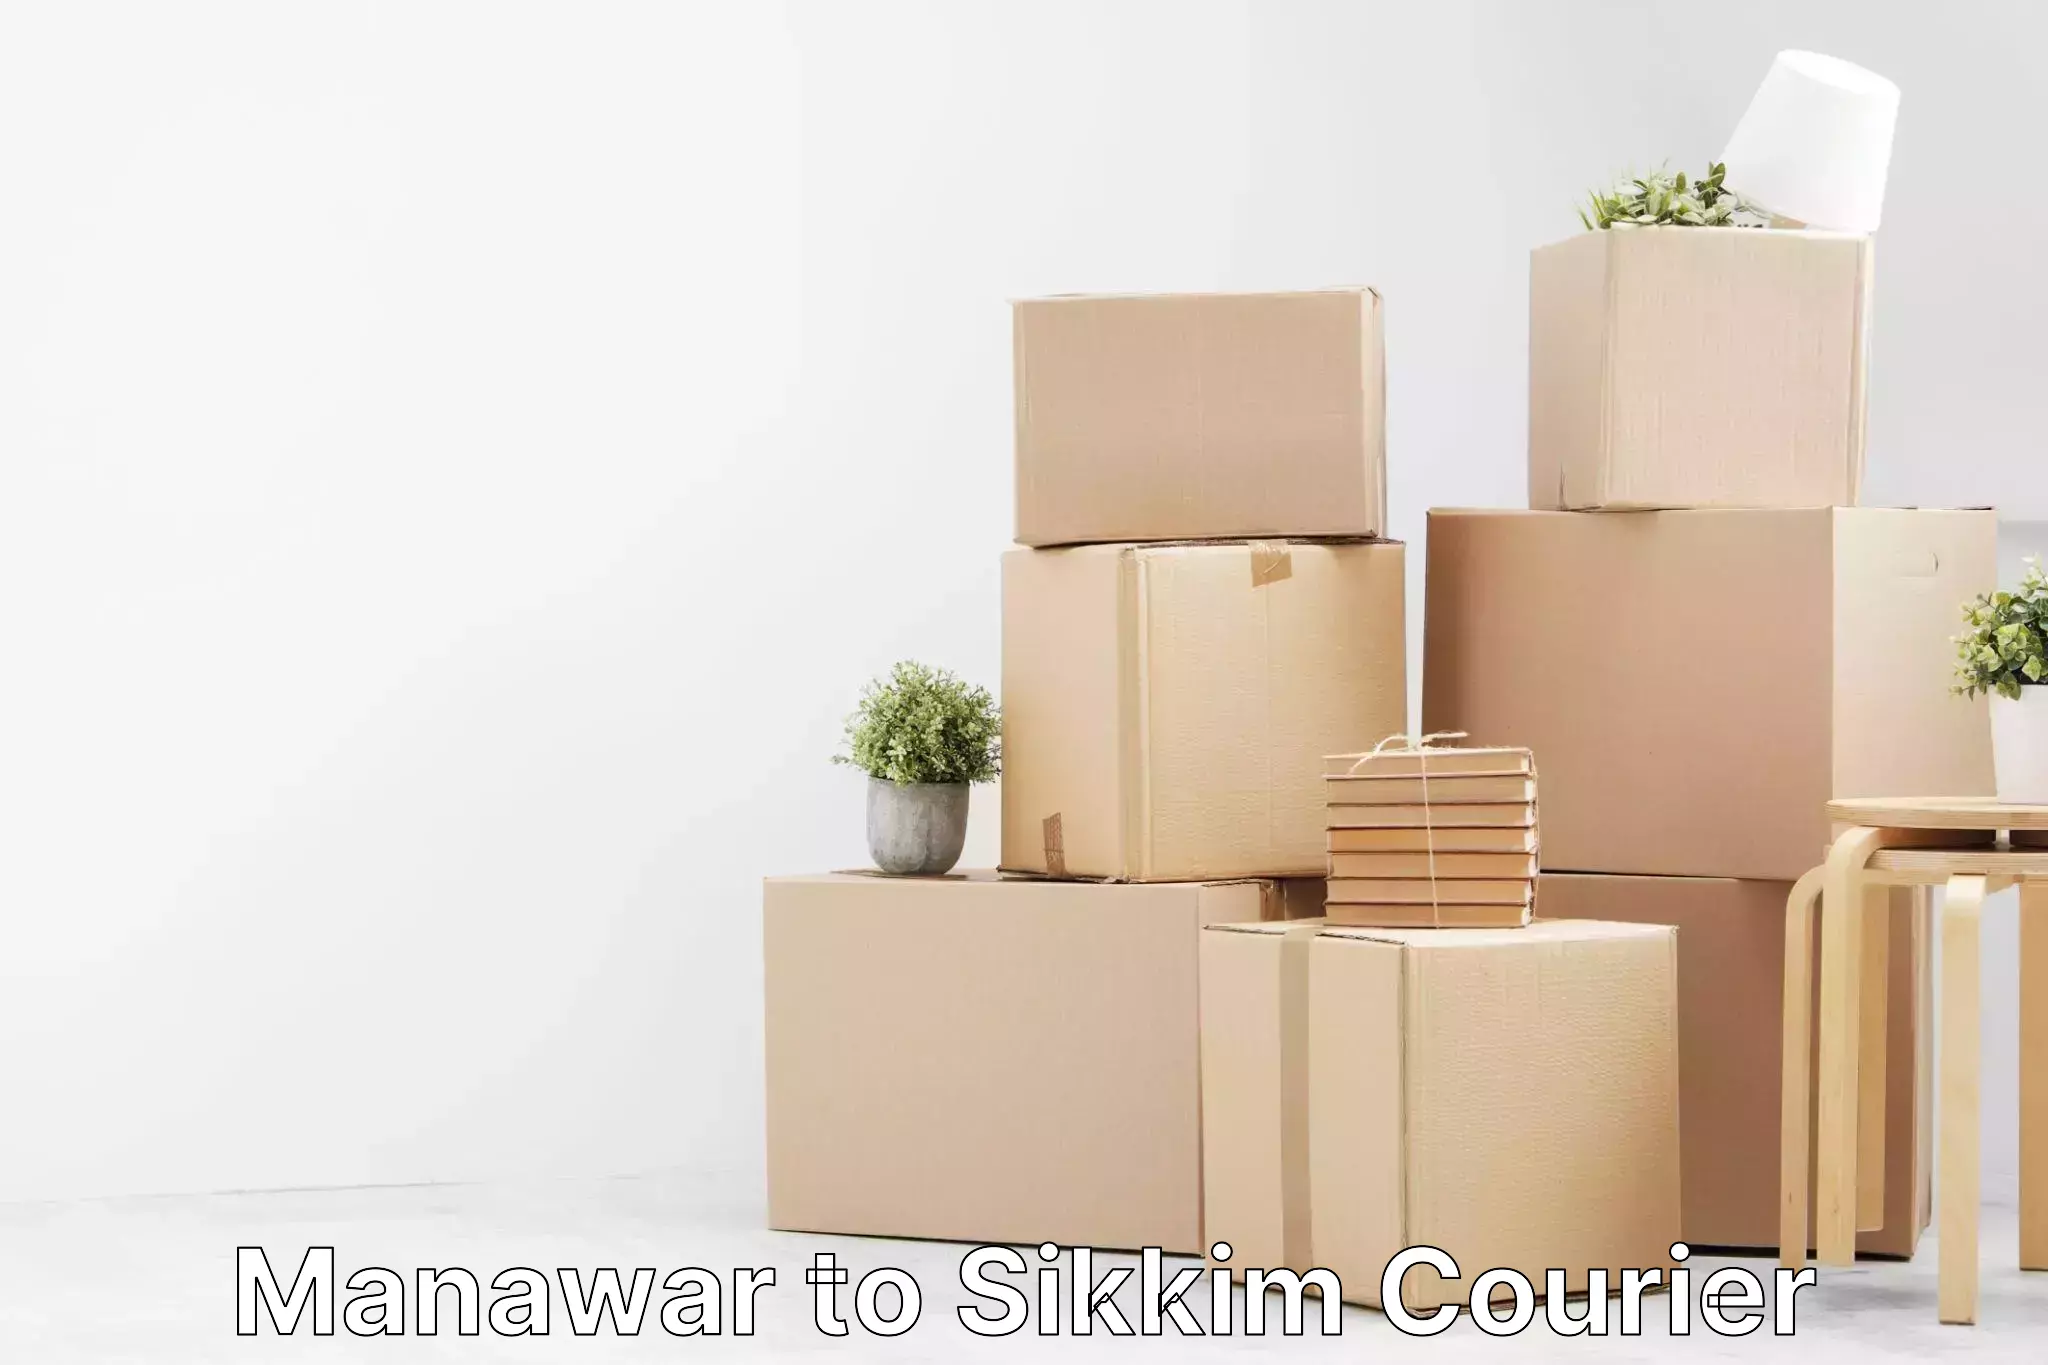 Subscription-based courier Manawar to Sikkim